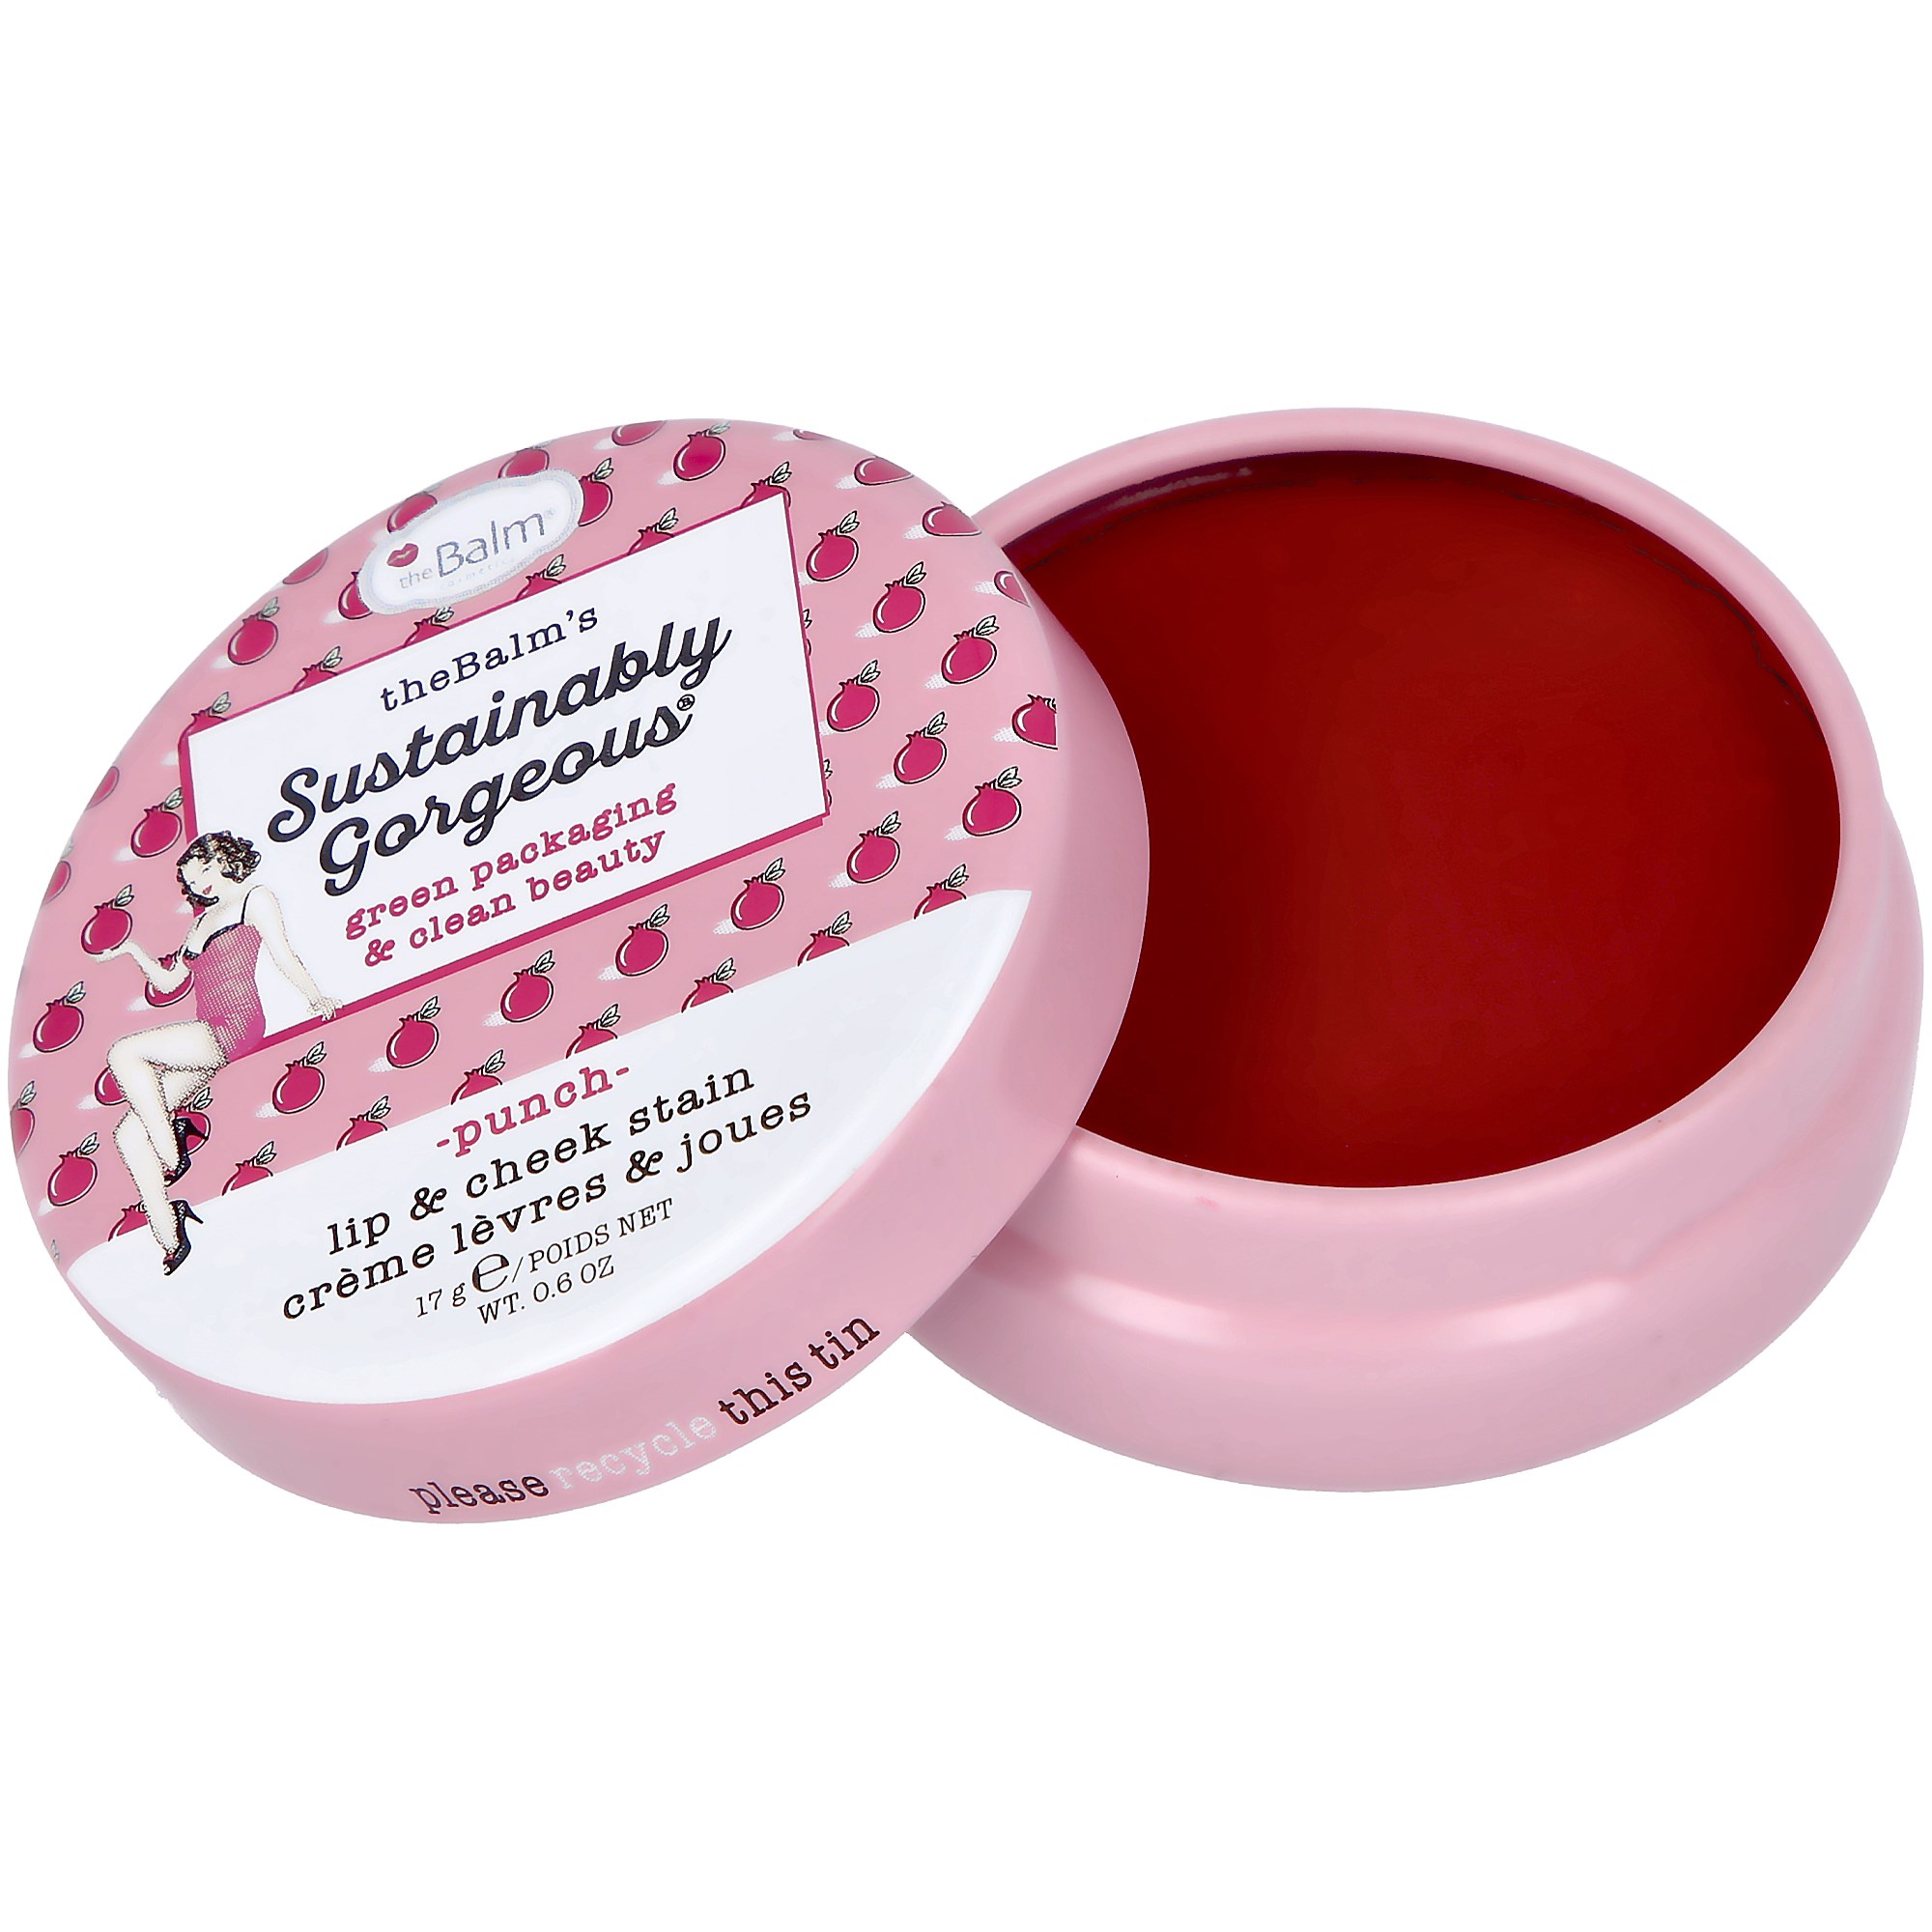 Läs mer om the Balm Sustainably Gorgeous Lip & Cheek Stain Punch